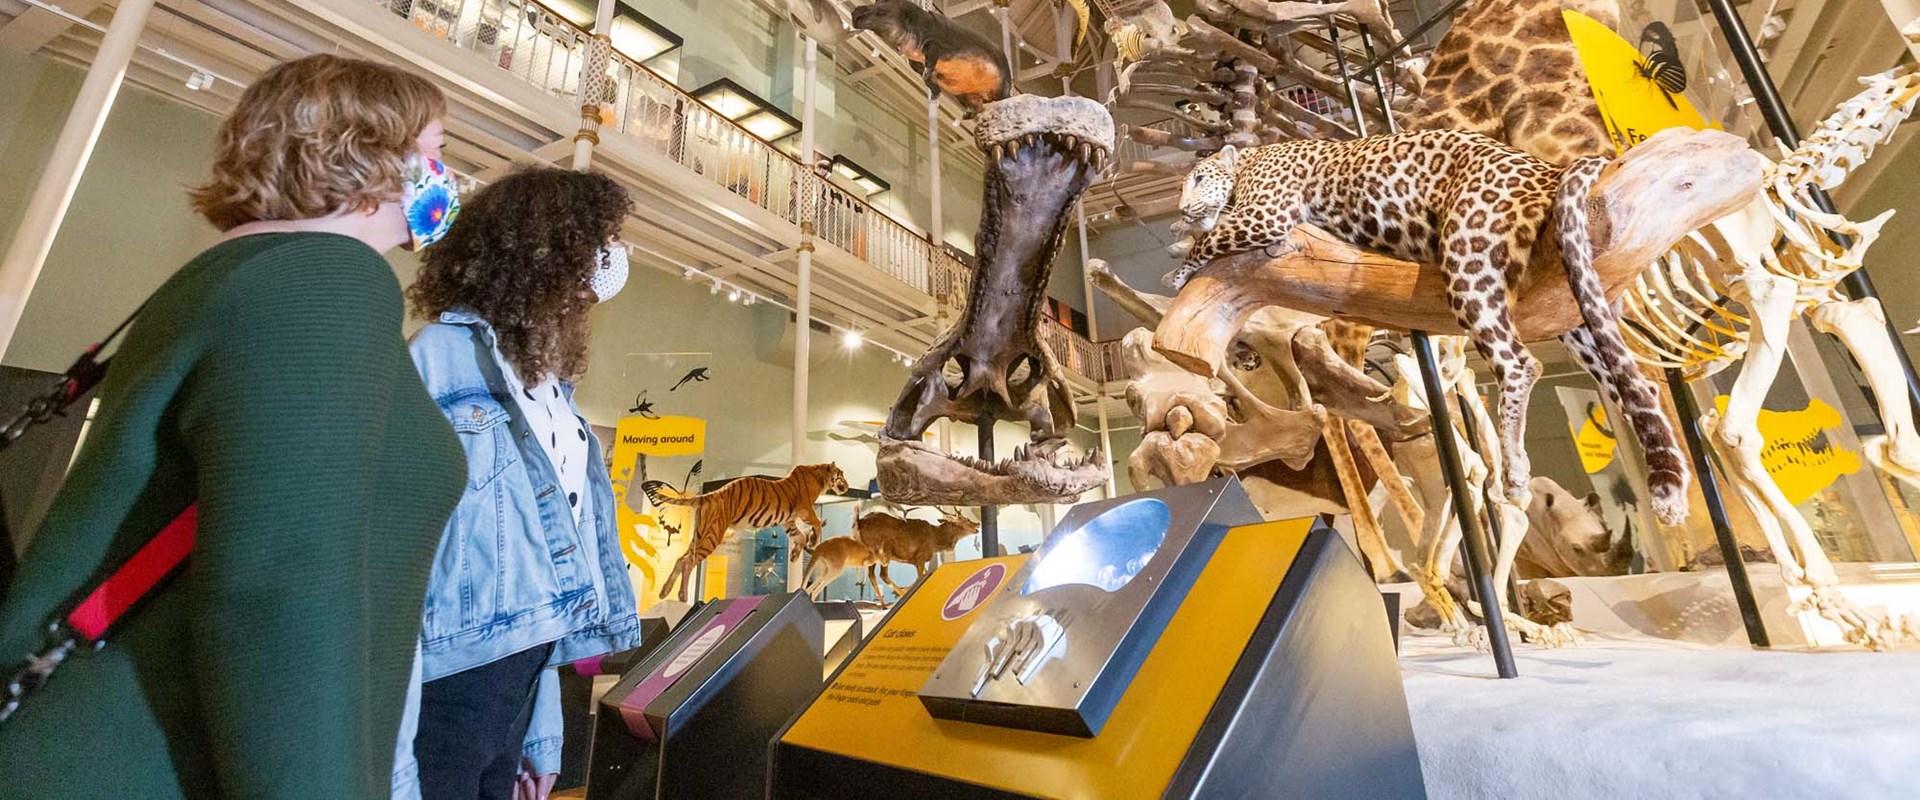 Two visitors wearing pasks look up at a variety of different animals and animal skeletons on display in the Animal World gallery.